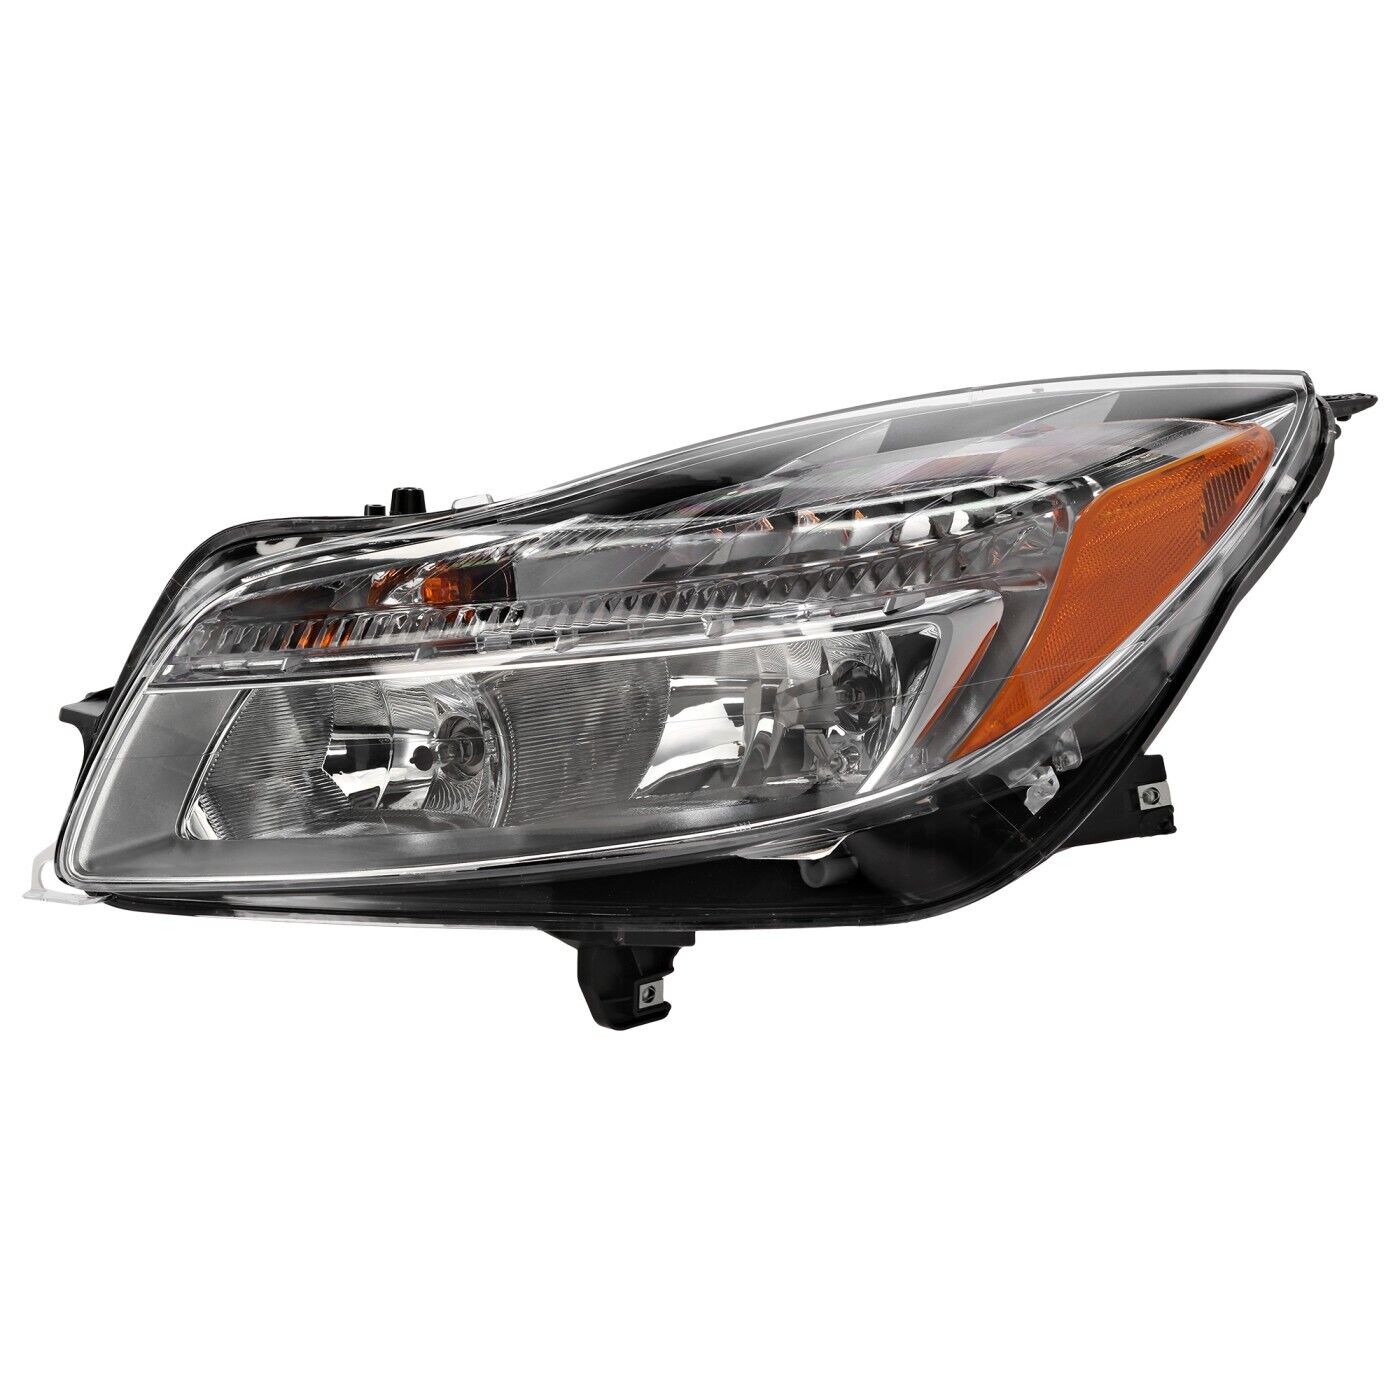 Headlight Assembly For 2011 2012 2013 Buick Regal Driver Side Halogen With Bulb